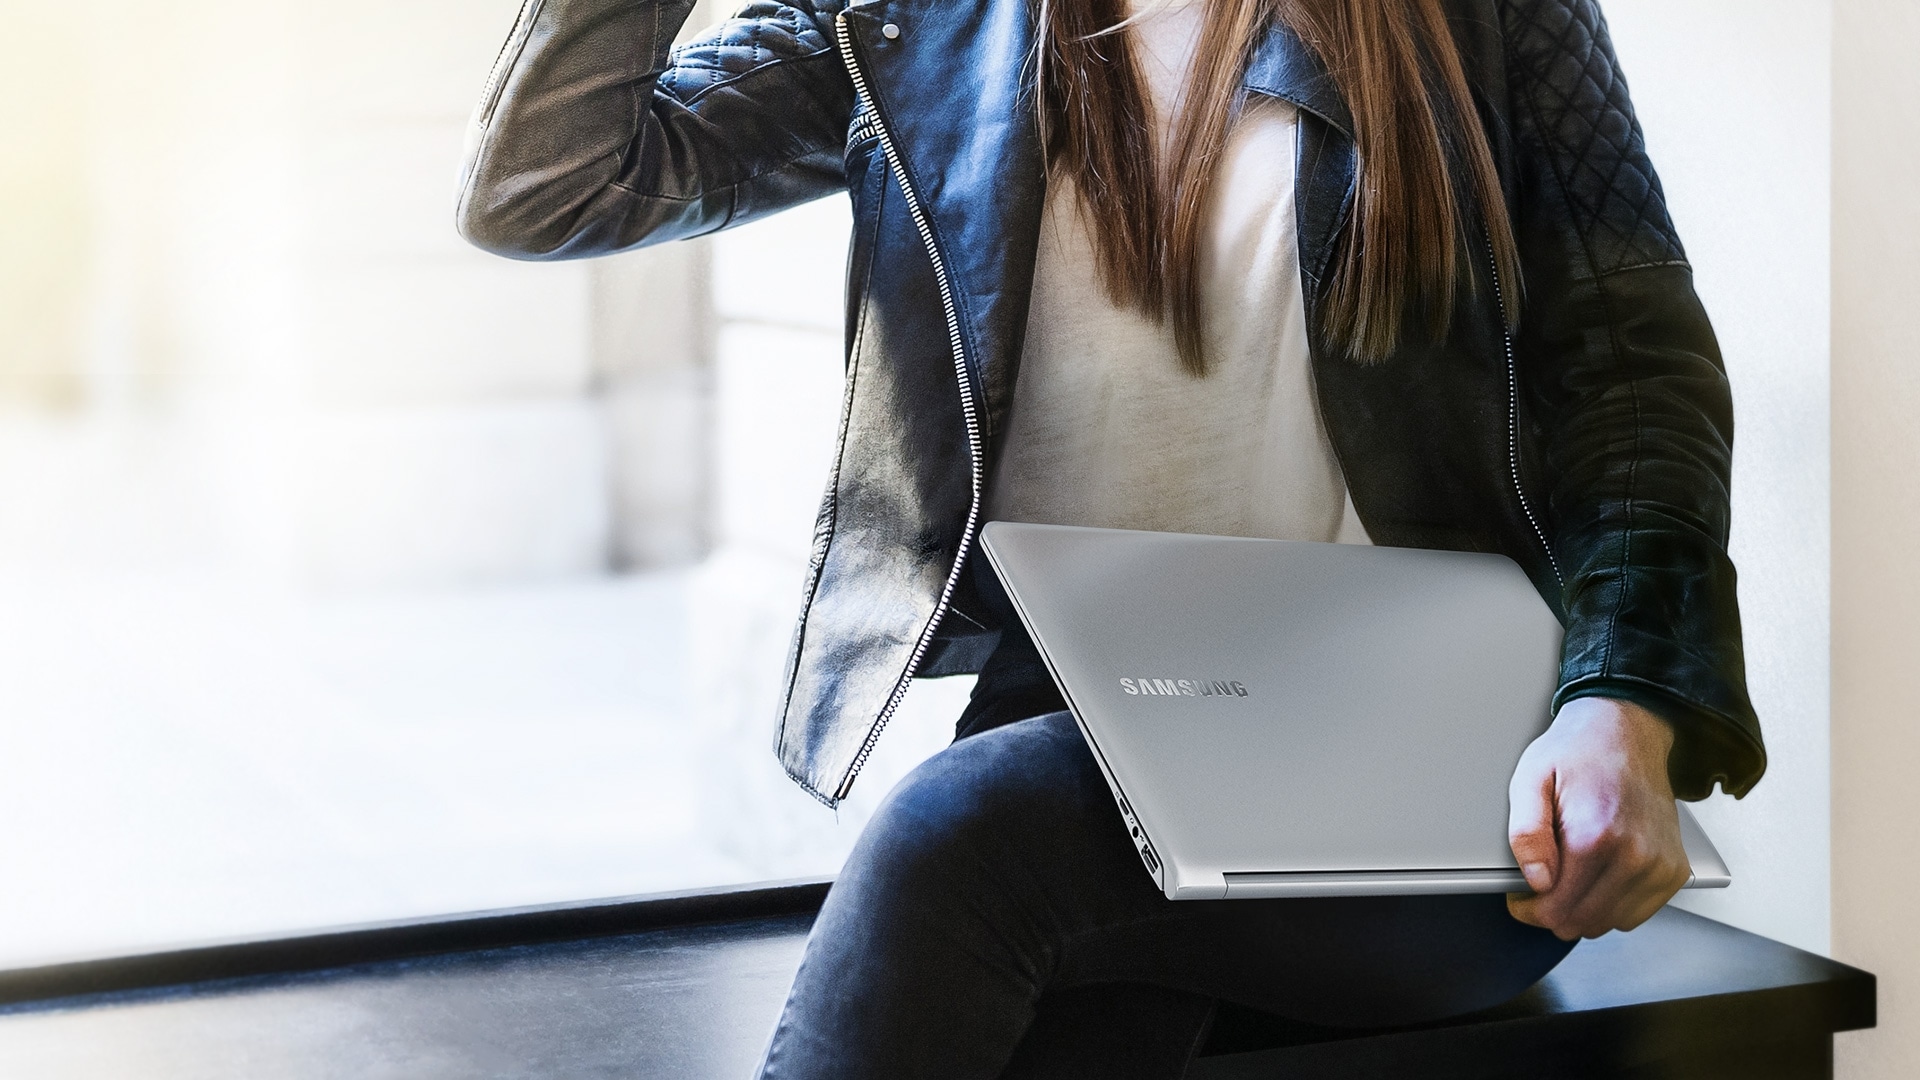 An image showing a female user carrying a Samsung Notebook 9.